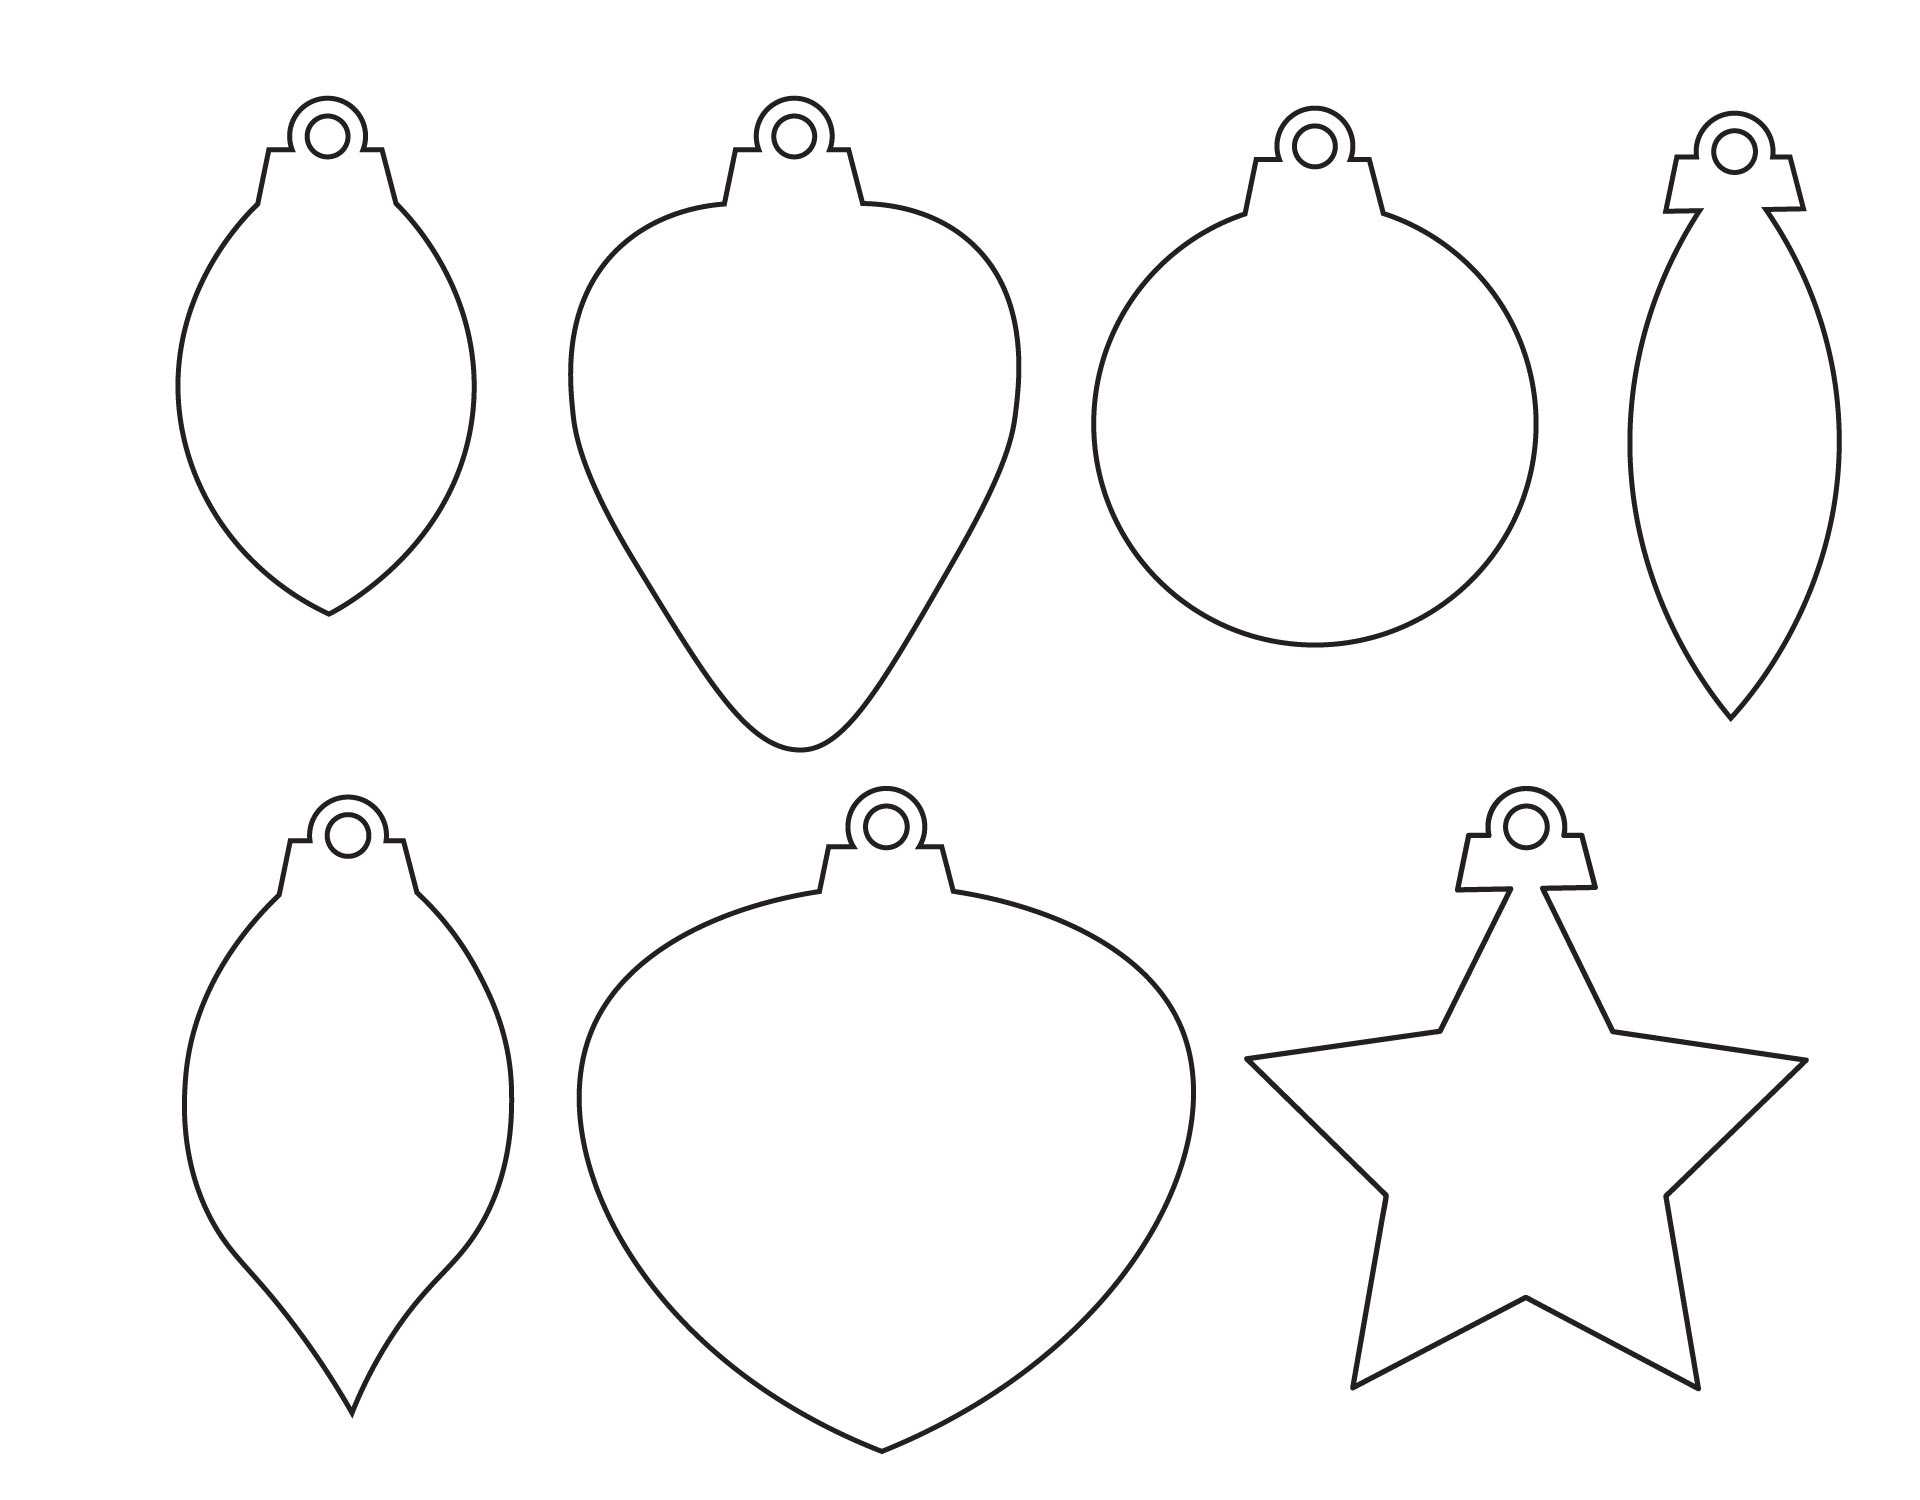 15 Best Free Printable Christmas Ornament Templates PDF for Free at ...